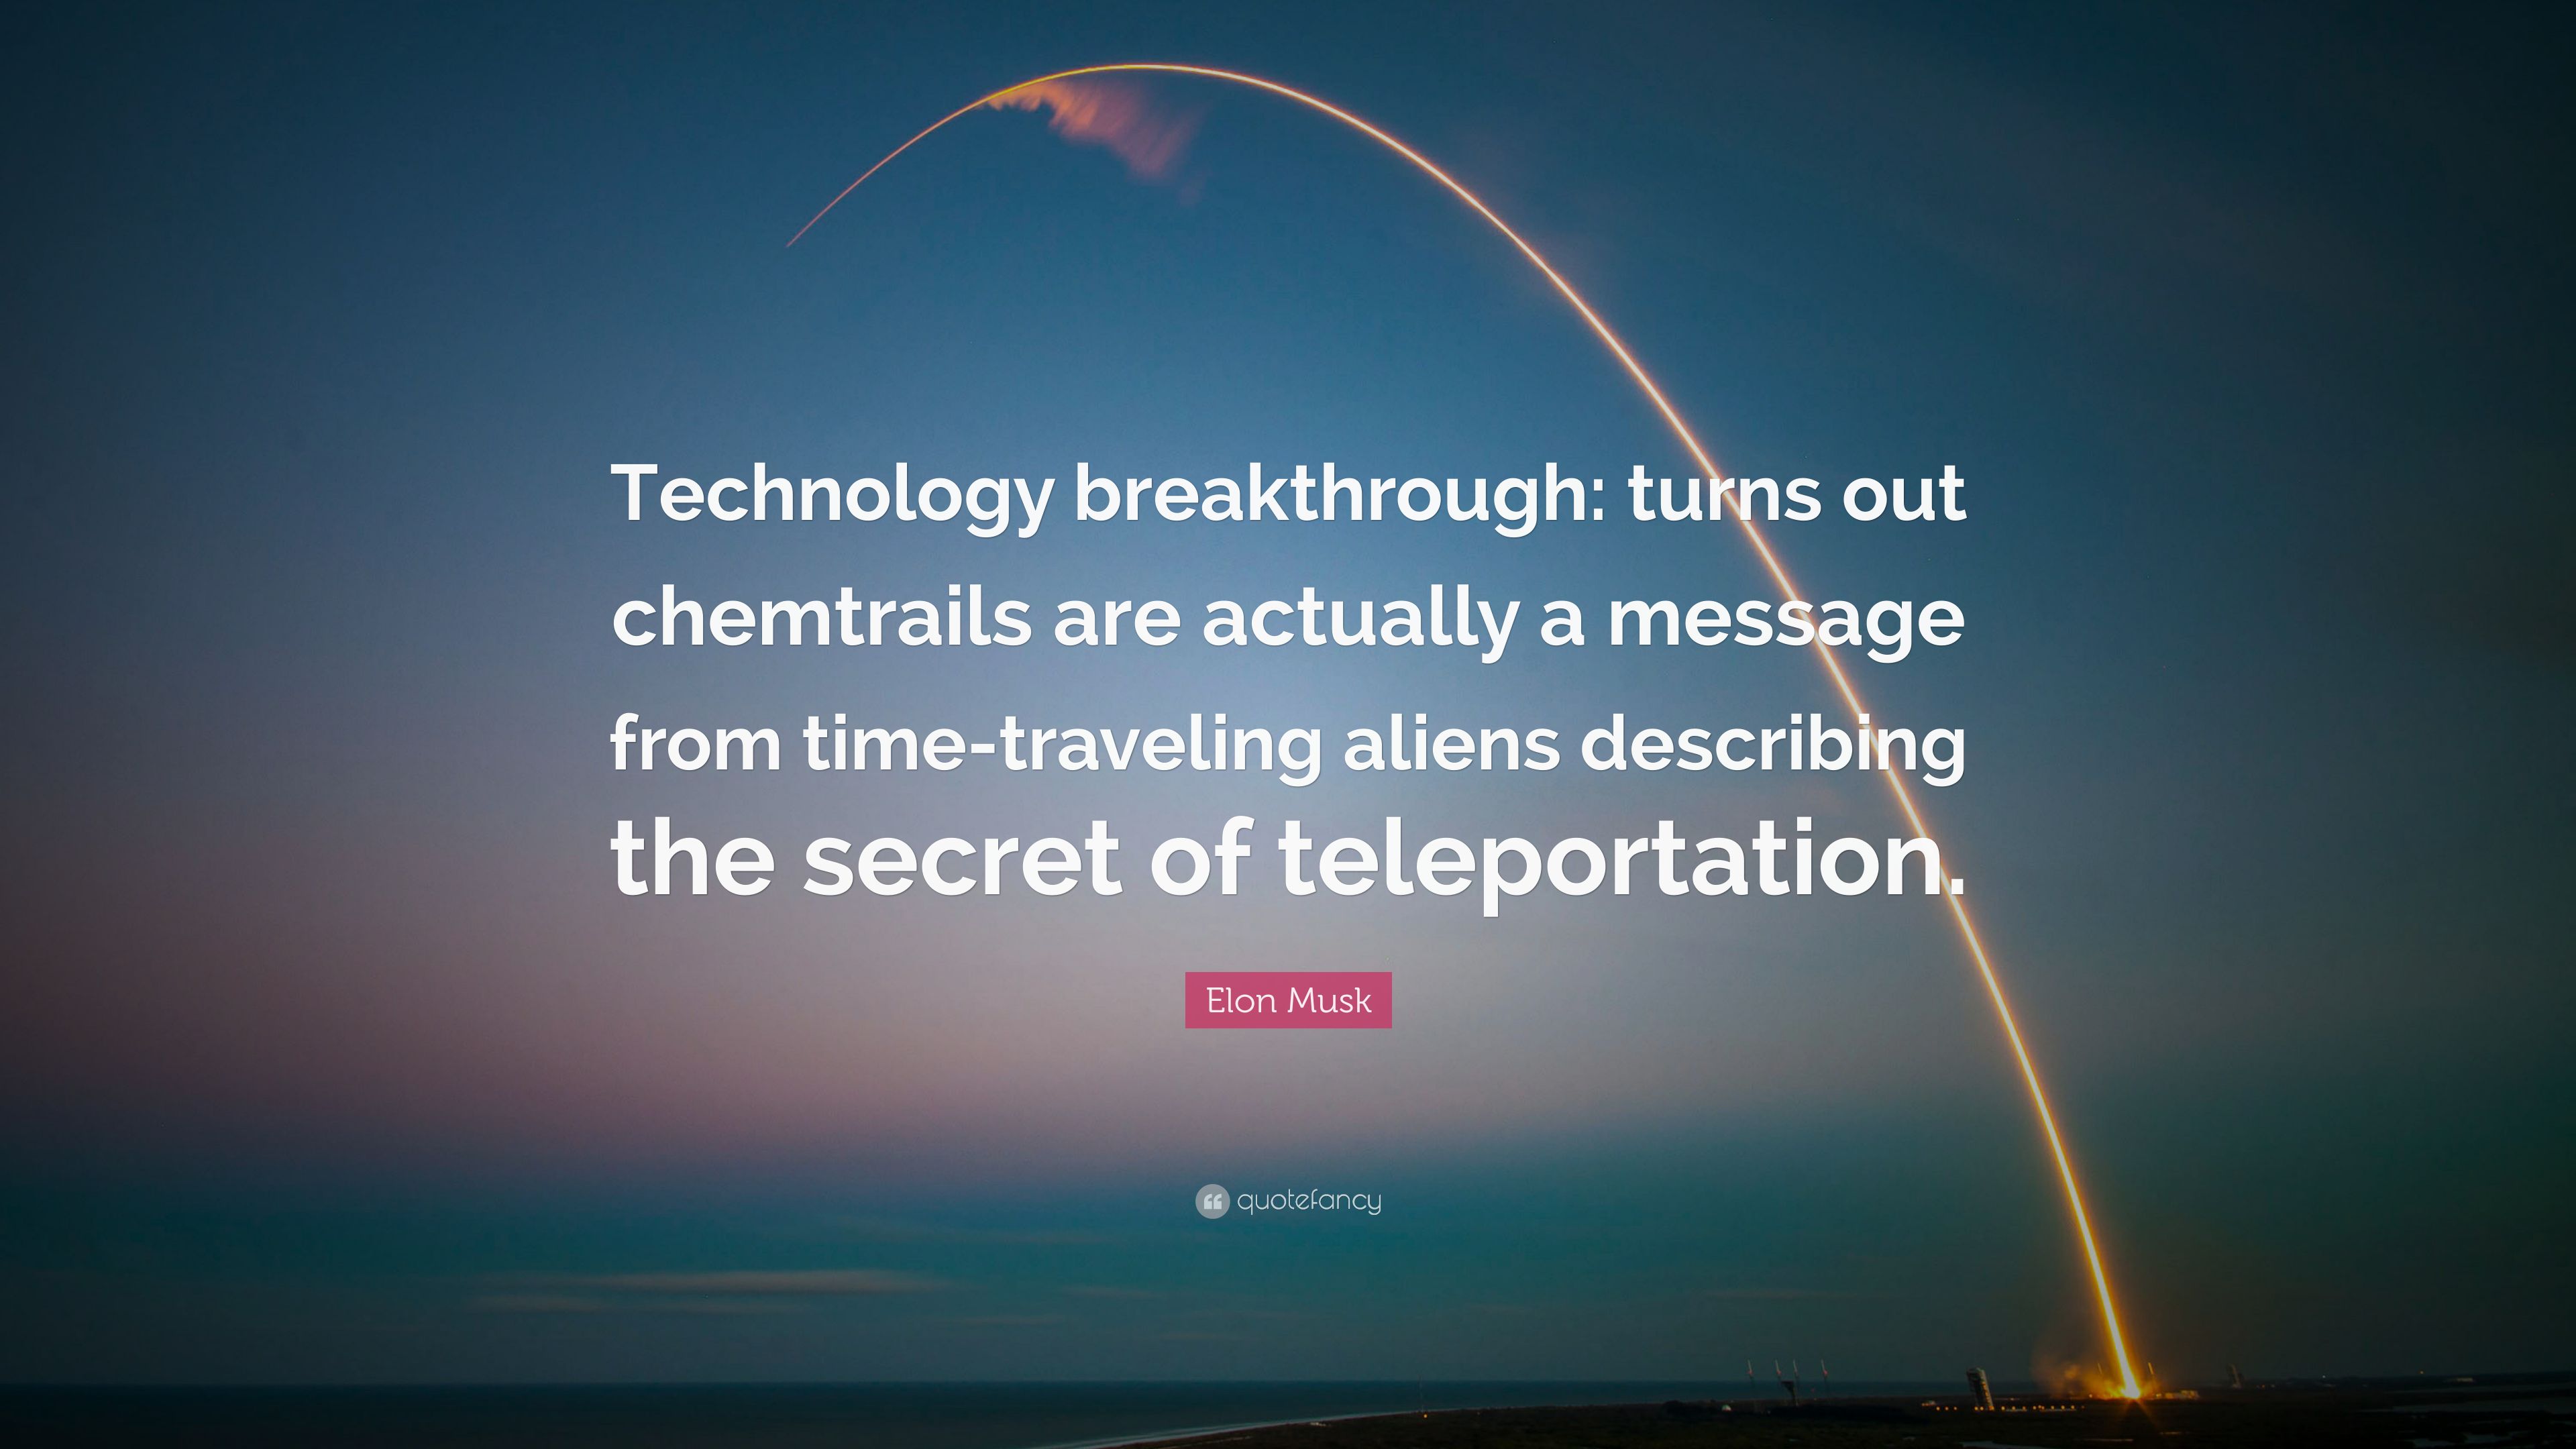 Elon Musk Quote: “Technology breakthrough: turns out chemtrails